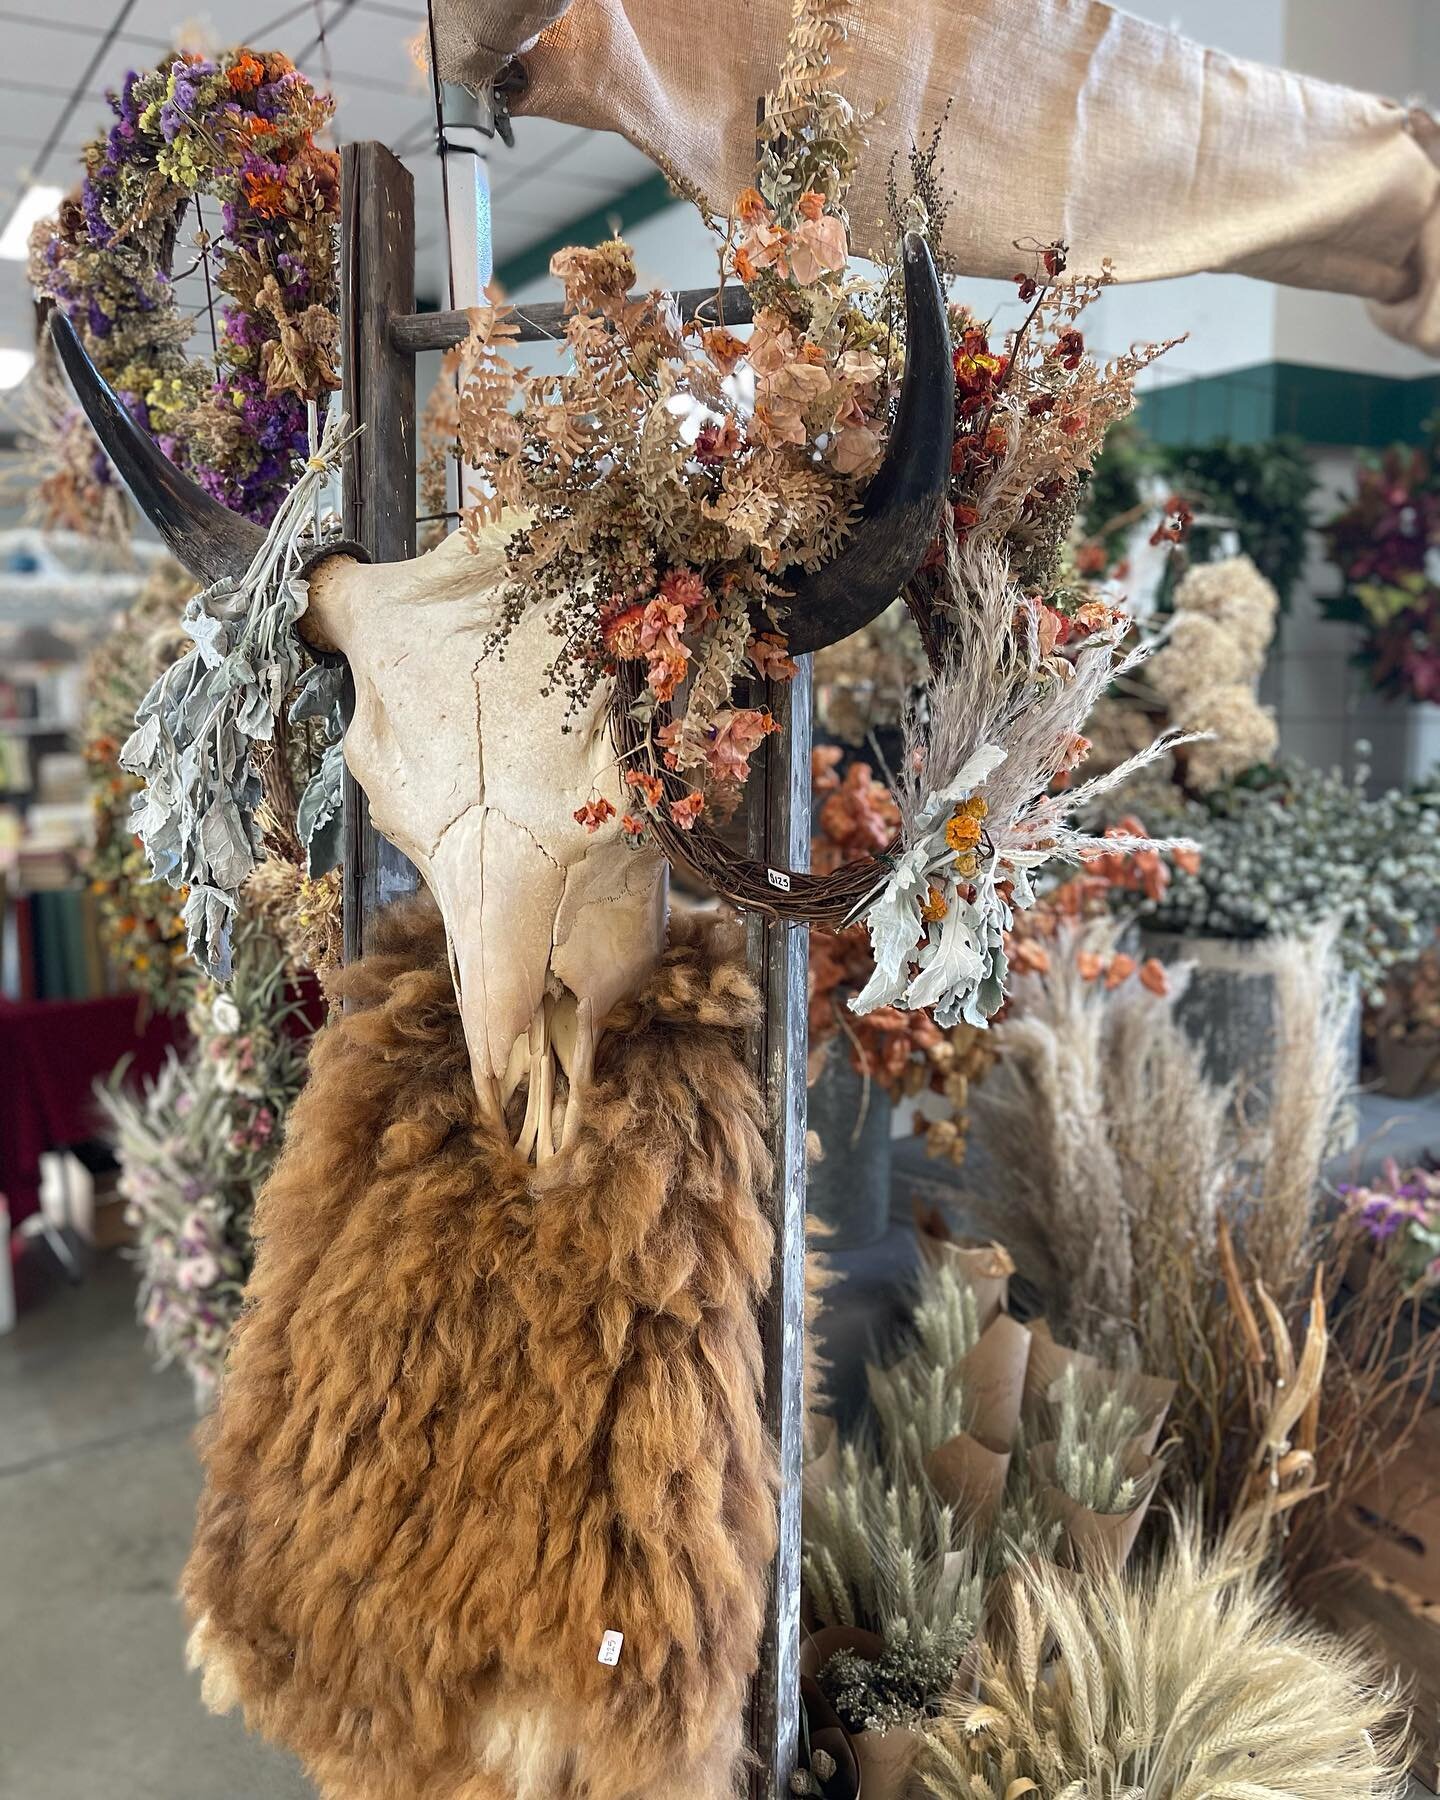 So happy to be back for another year @goathillfair! Friday and Saturday 8-4pm at the Santa Cruz County Fair grounds. Lots of great vintage finds, gifts and dried flowers of course!